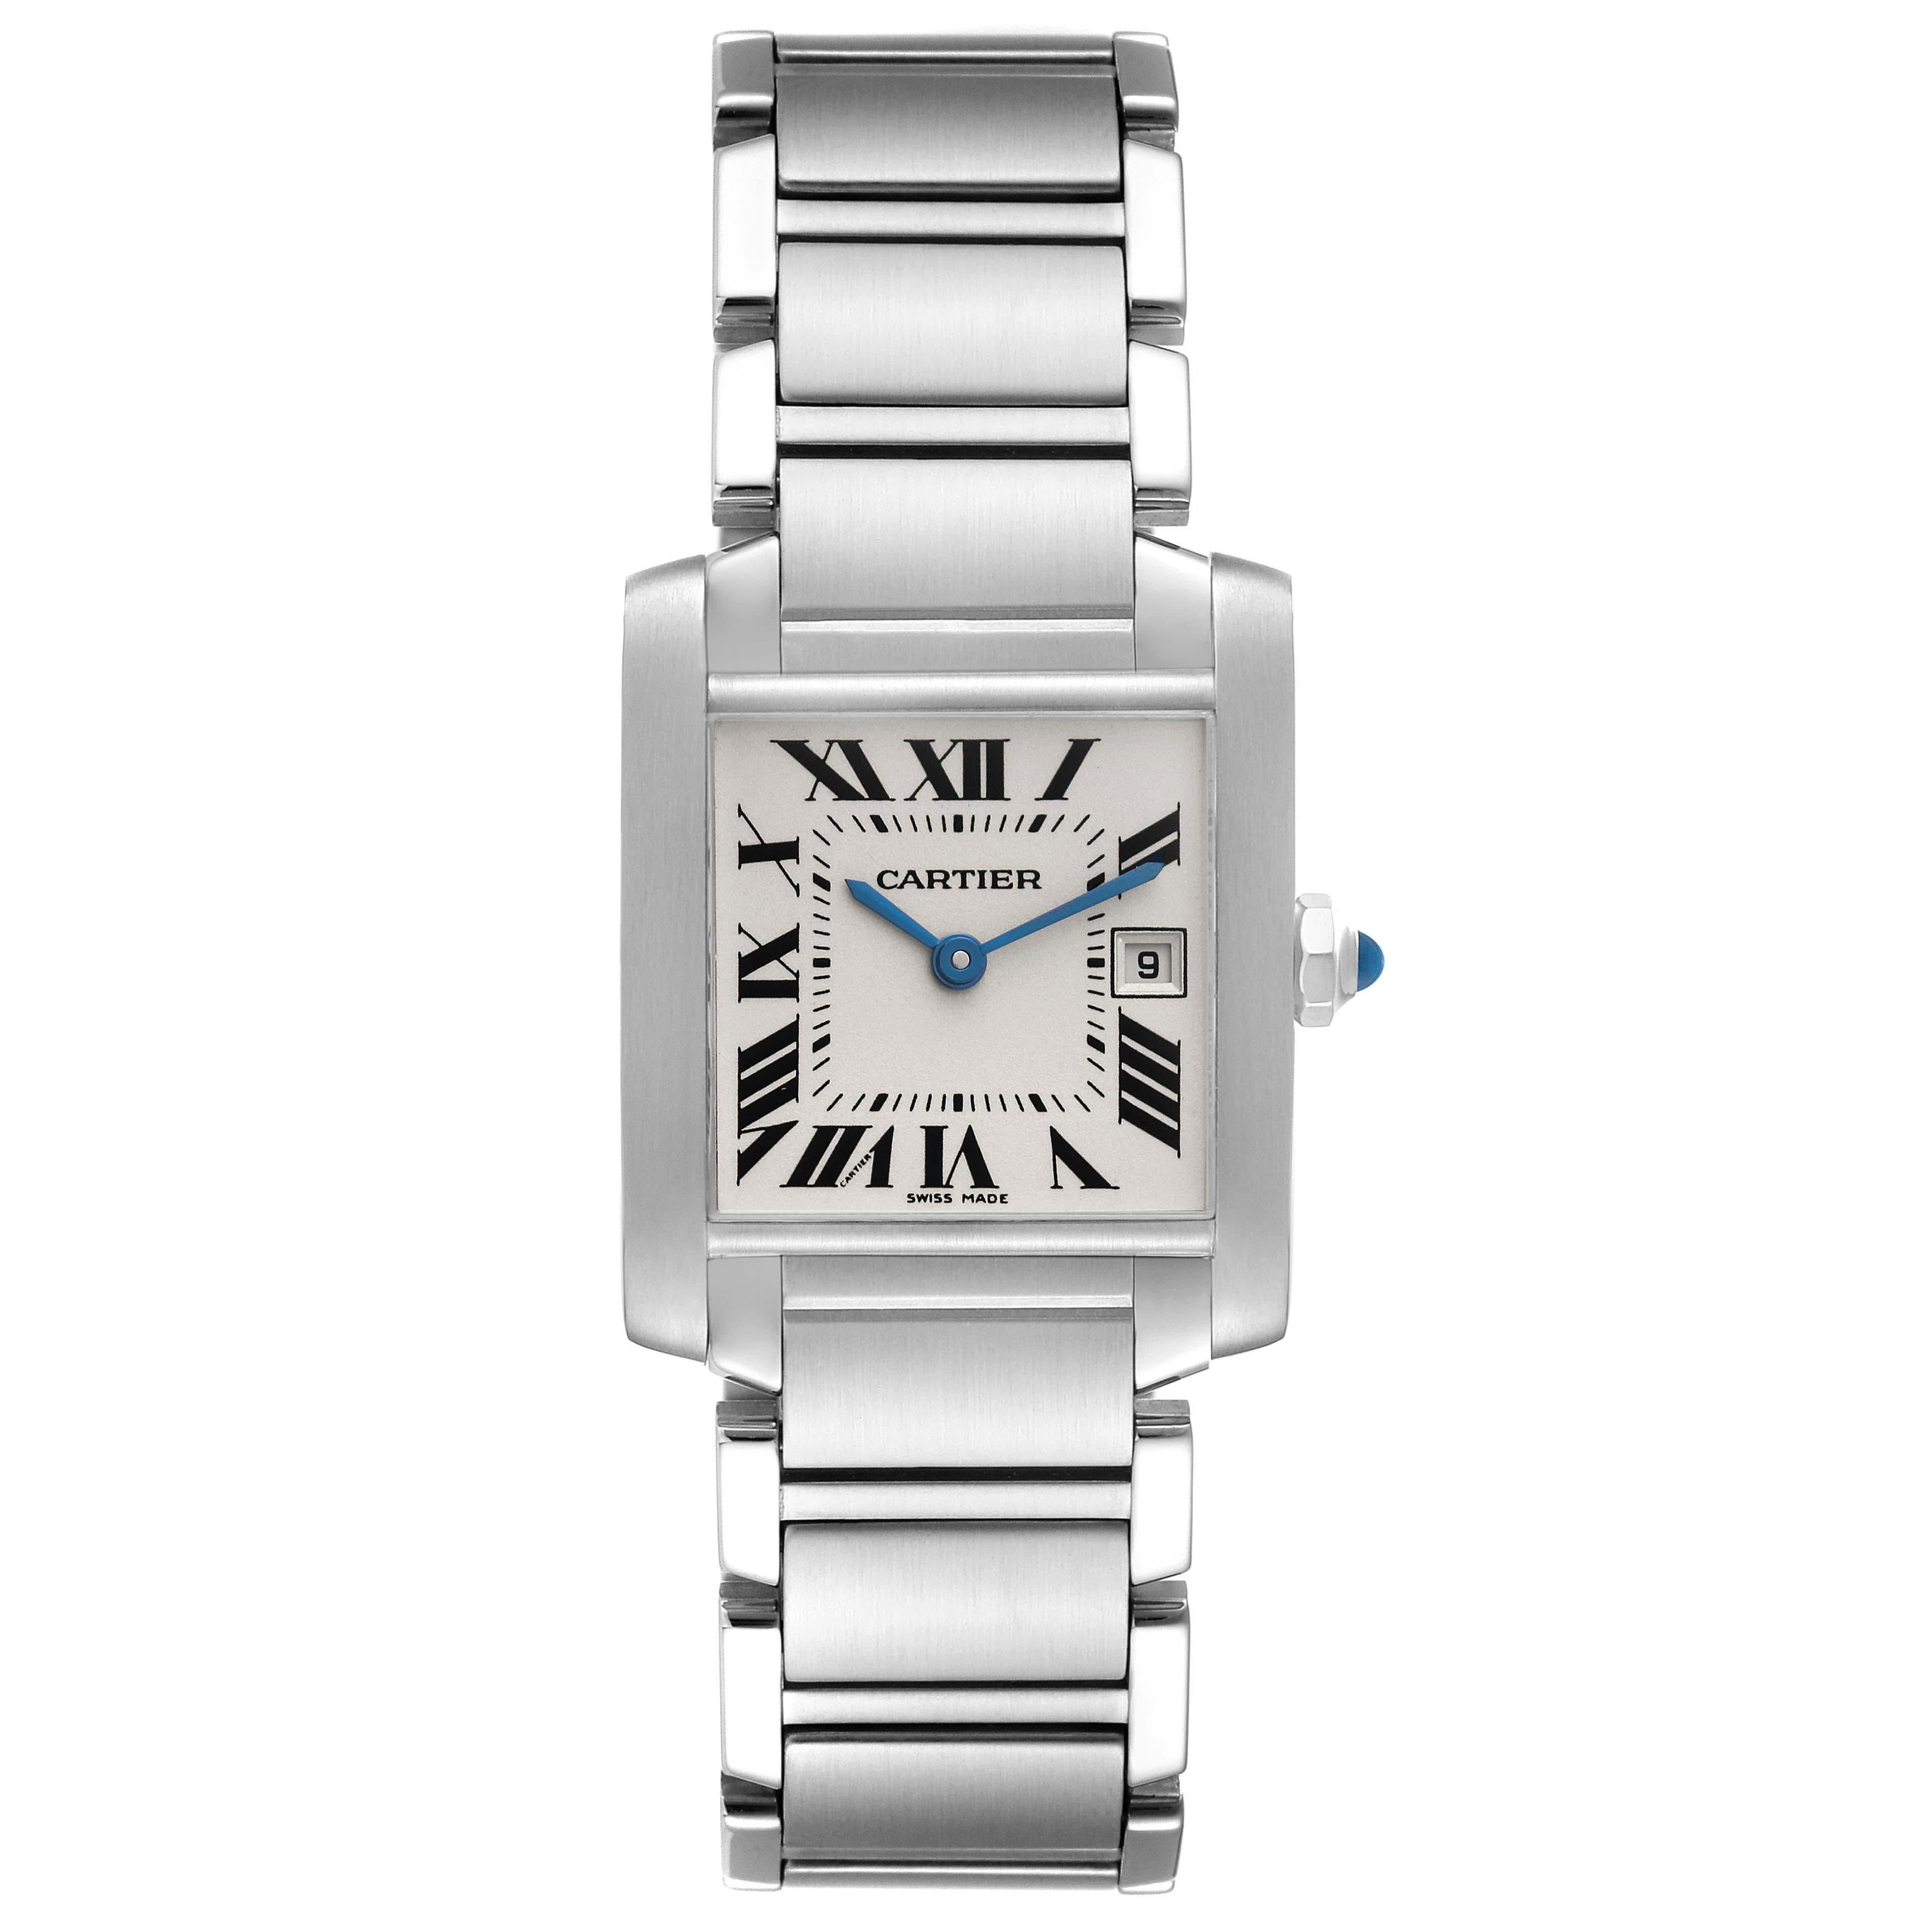 Cartier Tank Francaise Midsize Silver Dial Steel Ladies Watch W51011Q3. Quartz movement. Rectangular stainless steel 25.0 X 30.0 mm case. Octagonal crown set with a blue spinel cabochon. . Scratch resistant sapphire crystal. Silvered dial with black